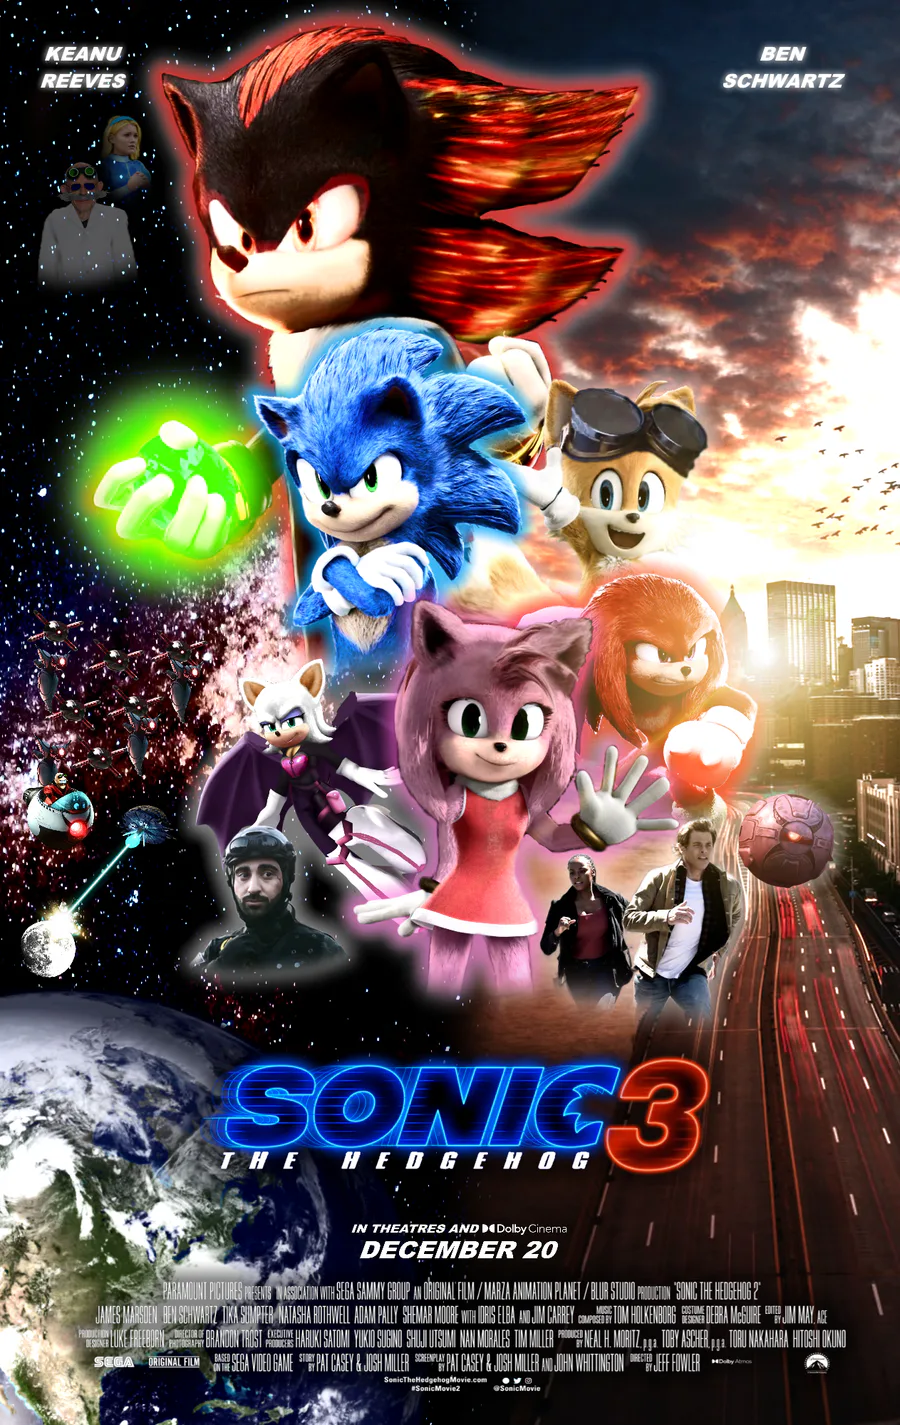 Sonic movienews on X: Sonic The Hedgehog 3 hits movie theaters on December  20th 2024!🔥 Poster design: @Sonimovienews 👀 #sonicmovie3 #knuckes #sonic # sonicmovie #sonic3 #SonicTheHedegehog #Tails #MilesTailsPrower #RougeTheBat  #amyrose #sonamy